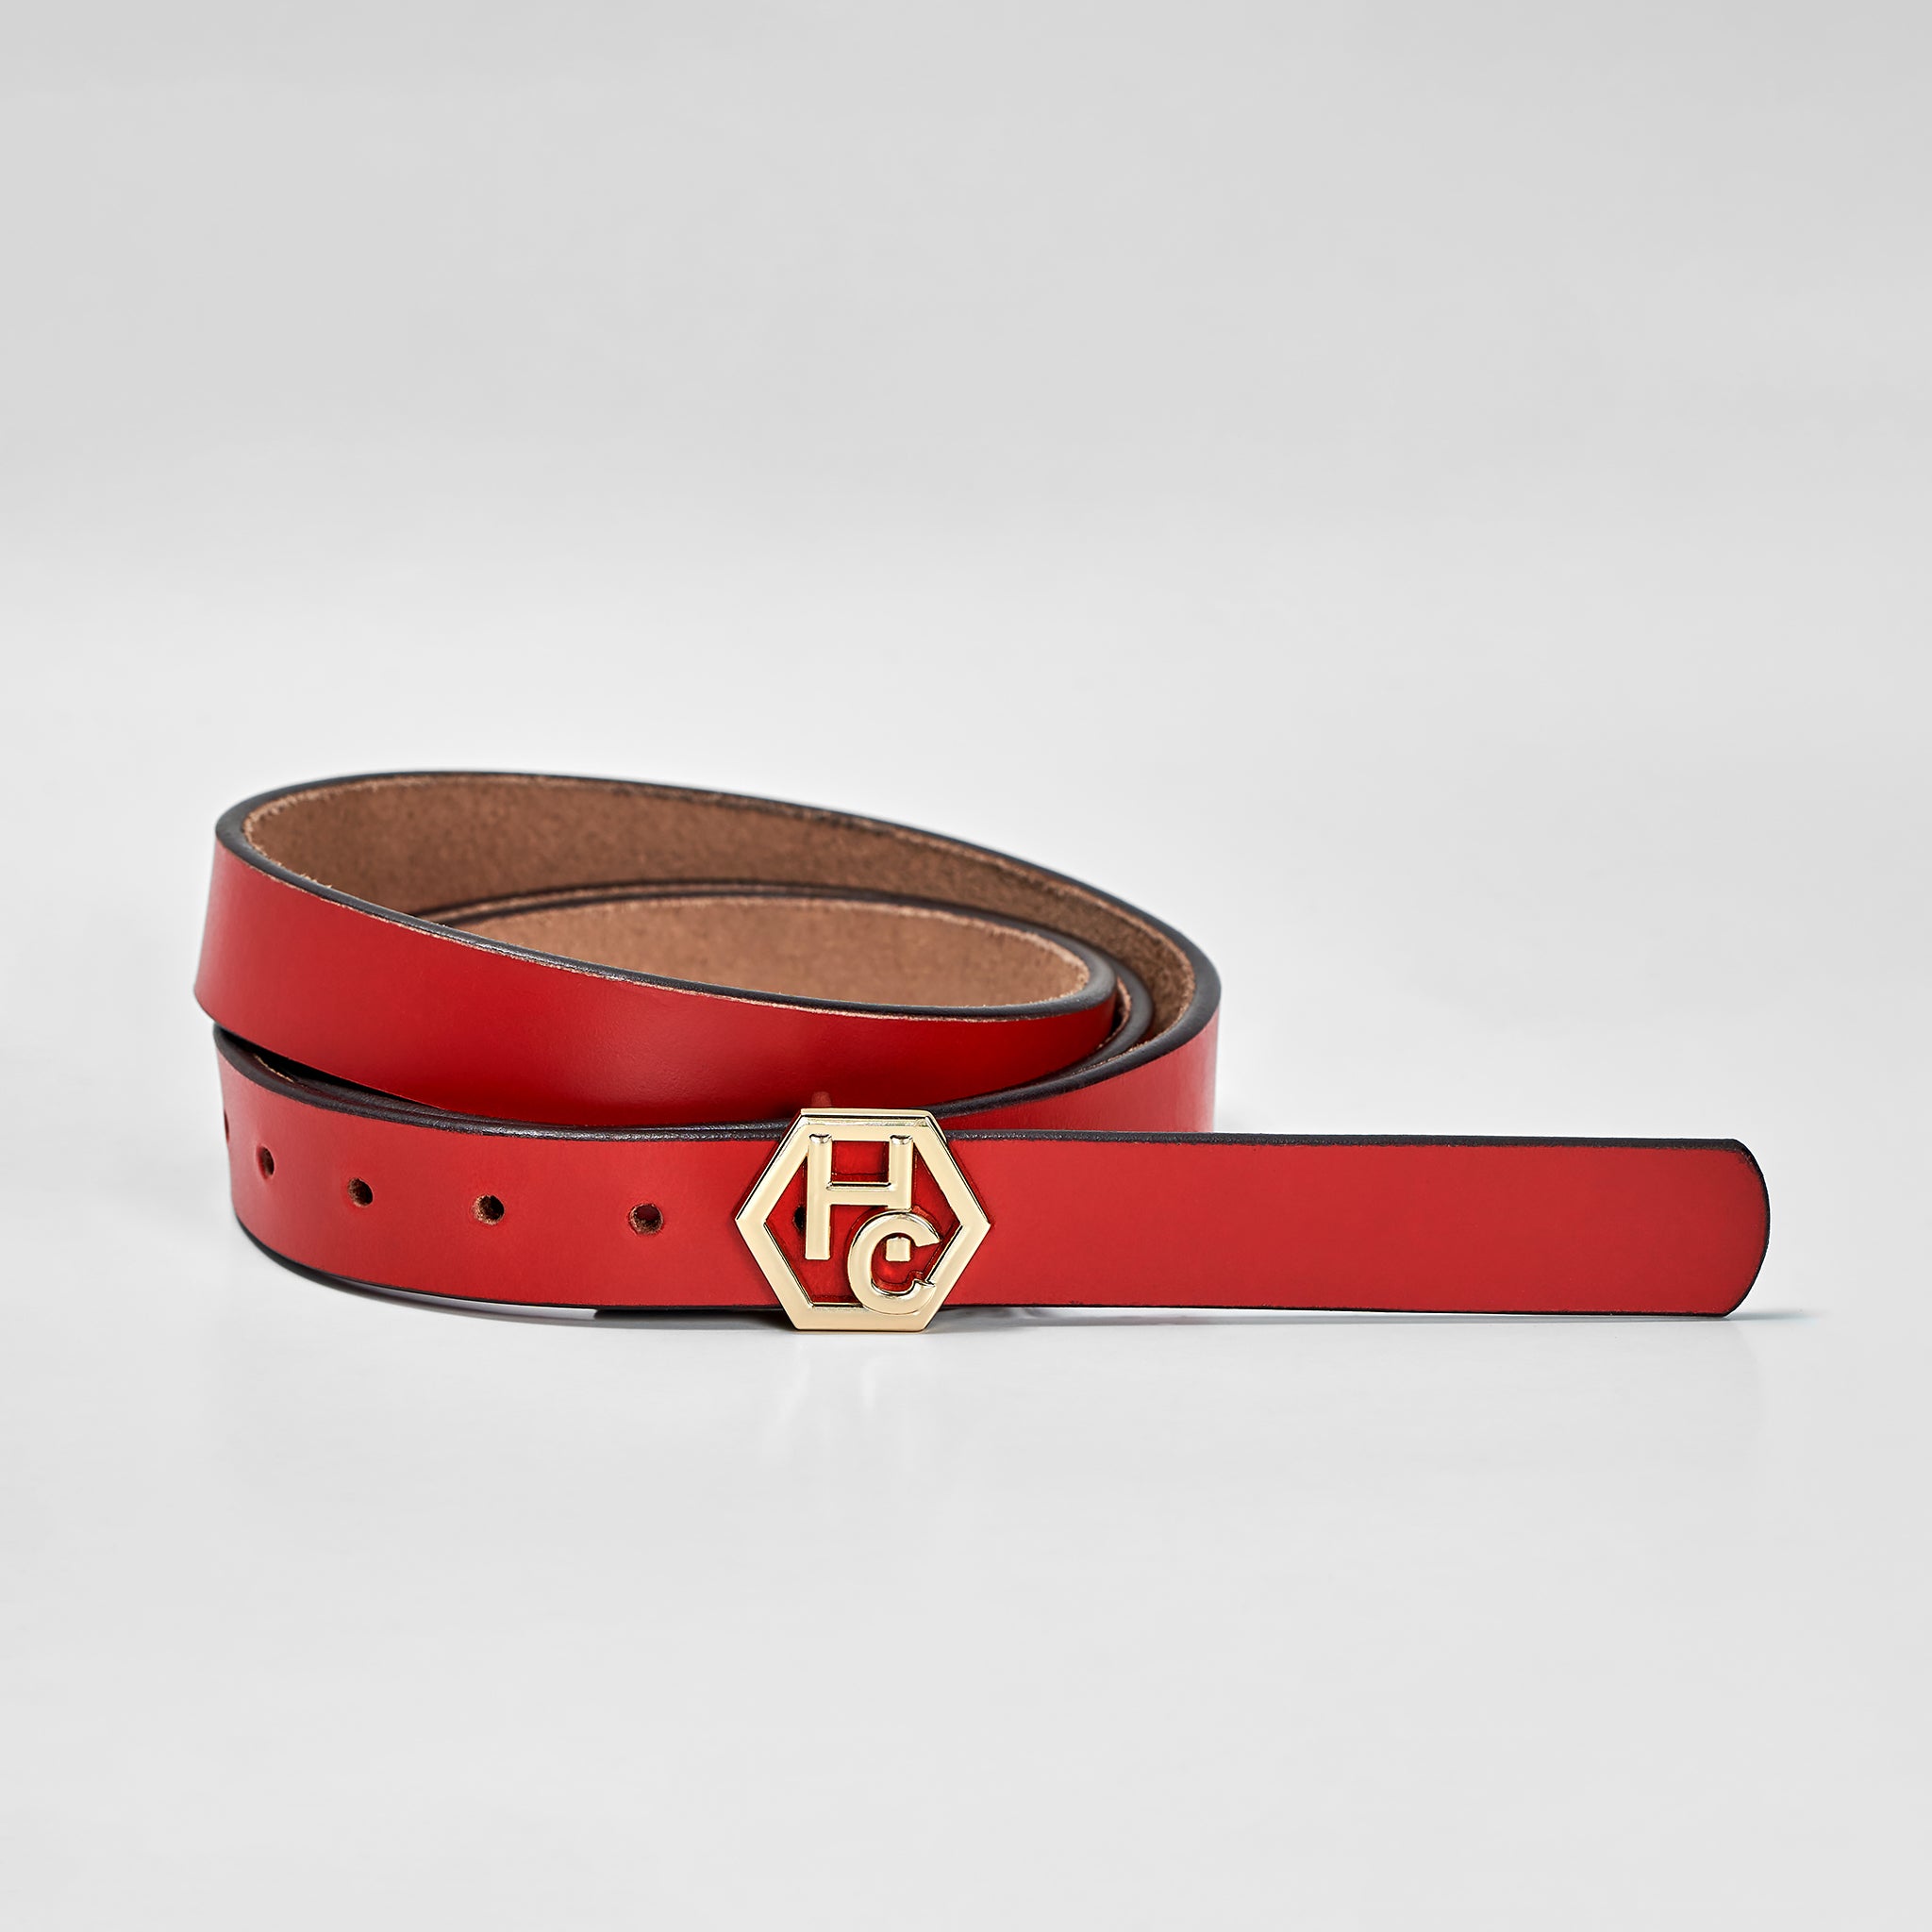 Hedonist Chicago Seamless Red Leather Belt 1" 32381332390039